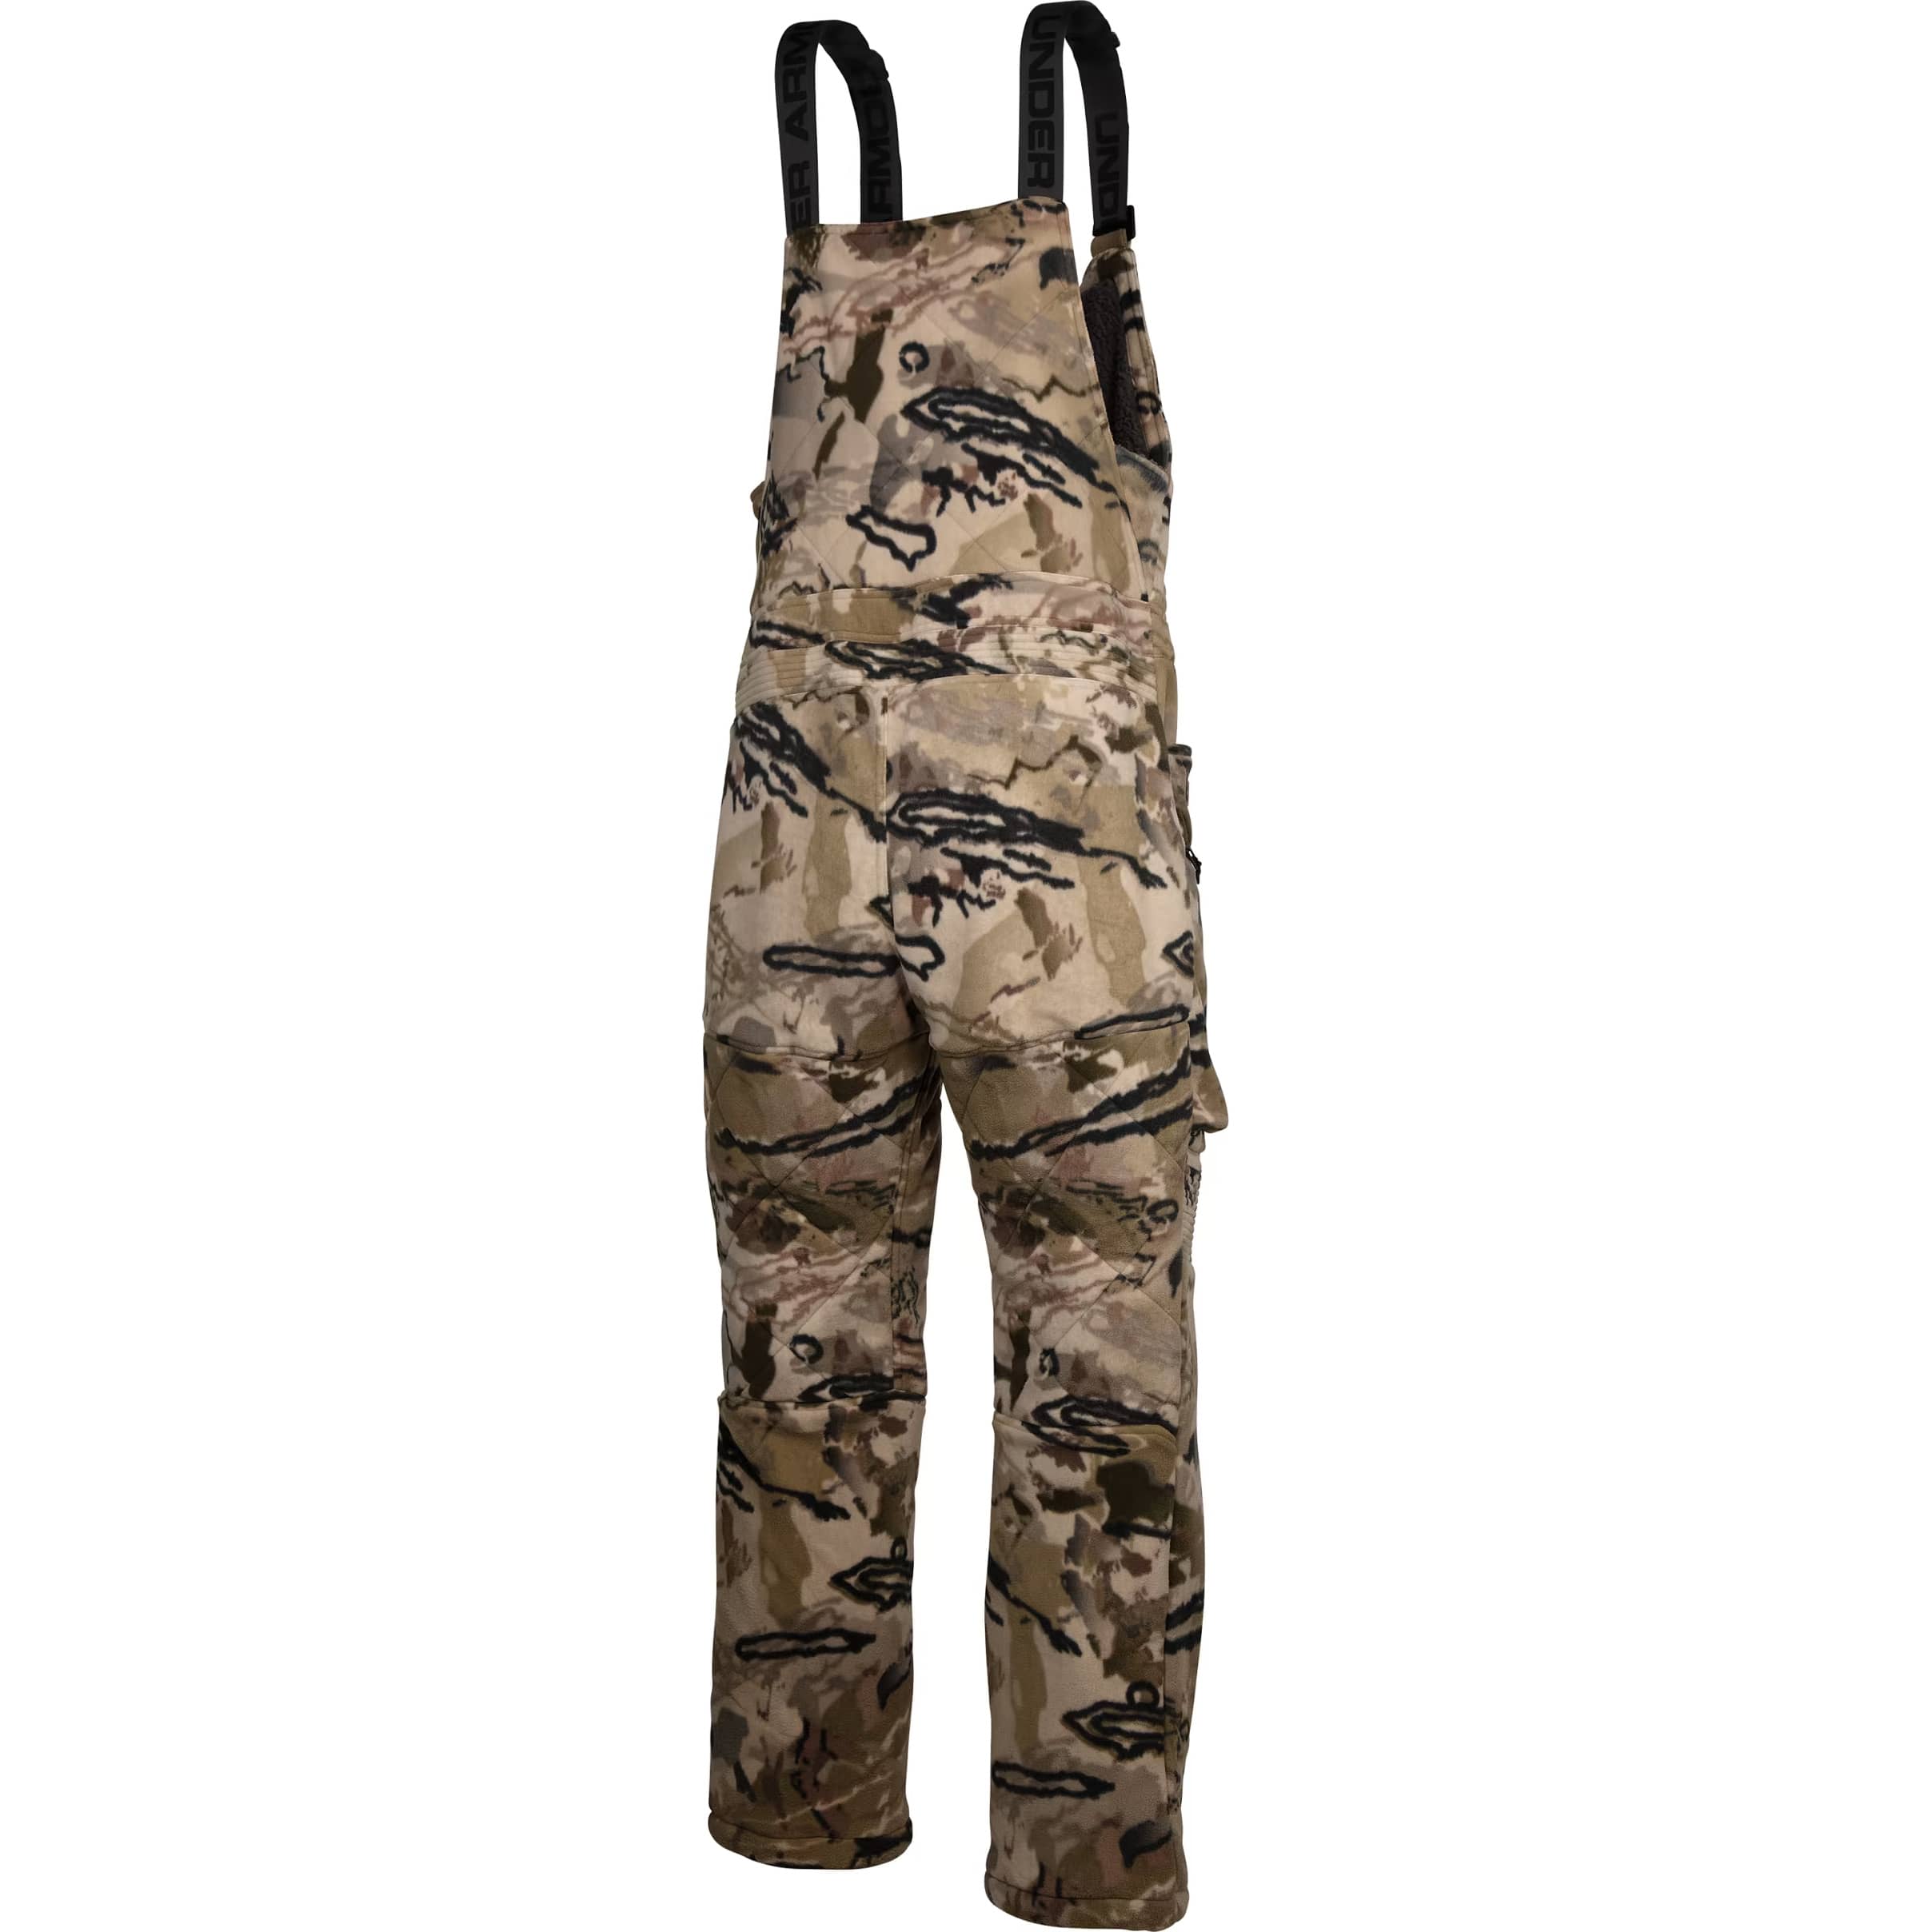 Under Armour® Men's Brow Tine ColdGear® Infrared Pants